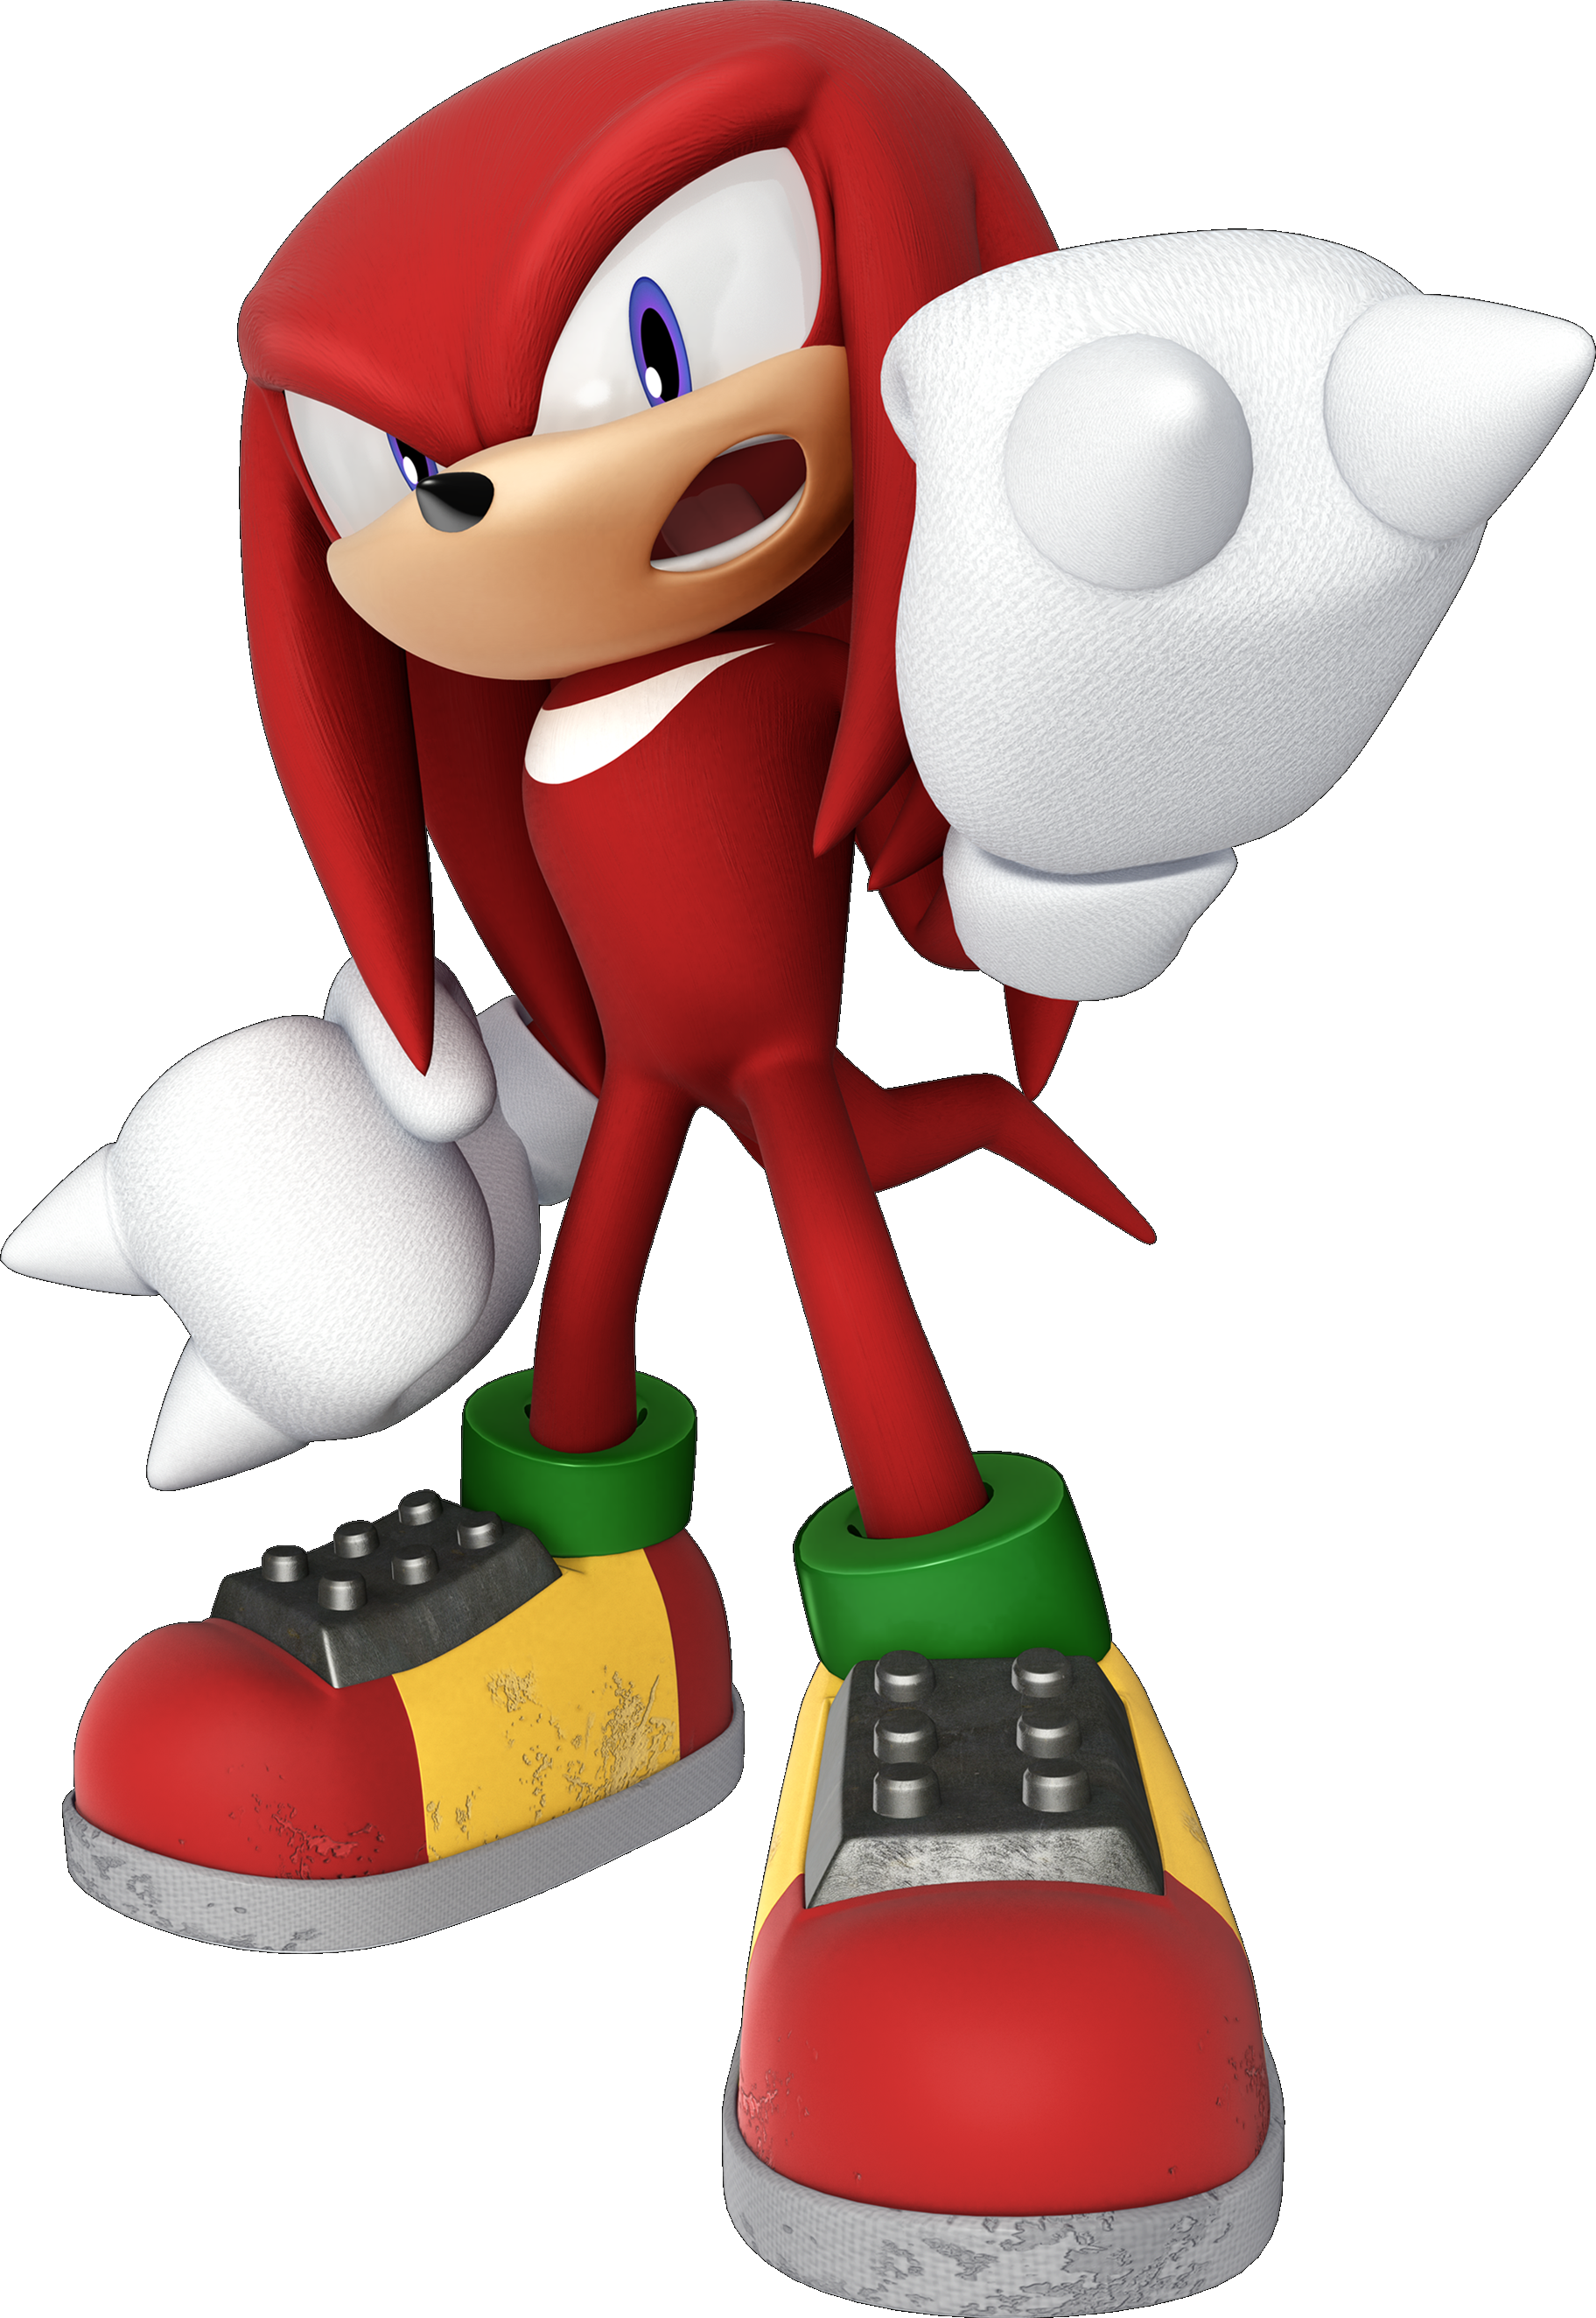 Sonic & Knuckles - Wikipedia